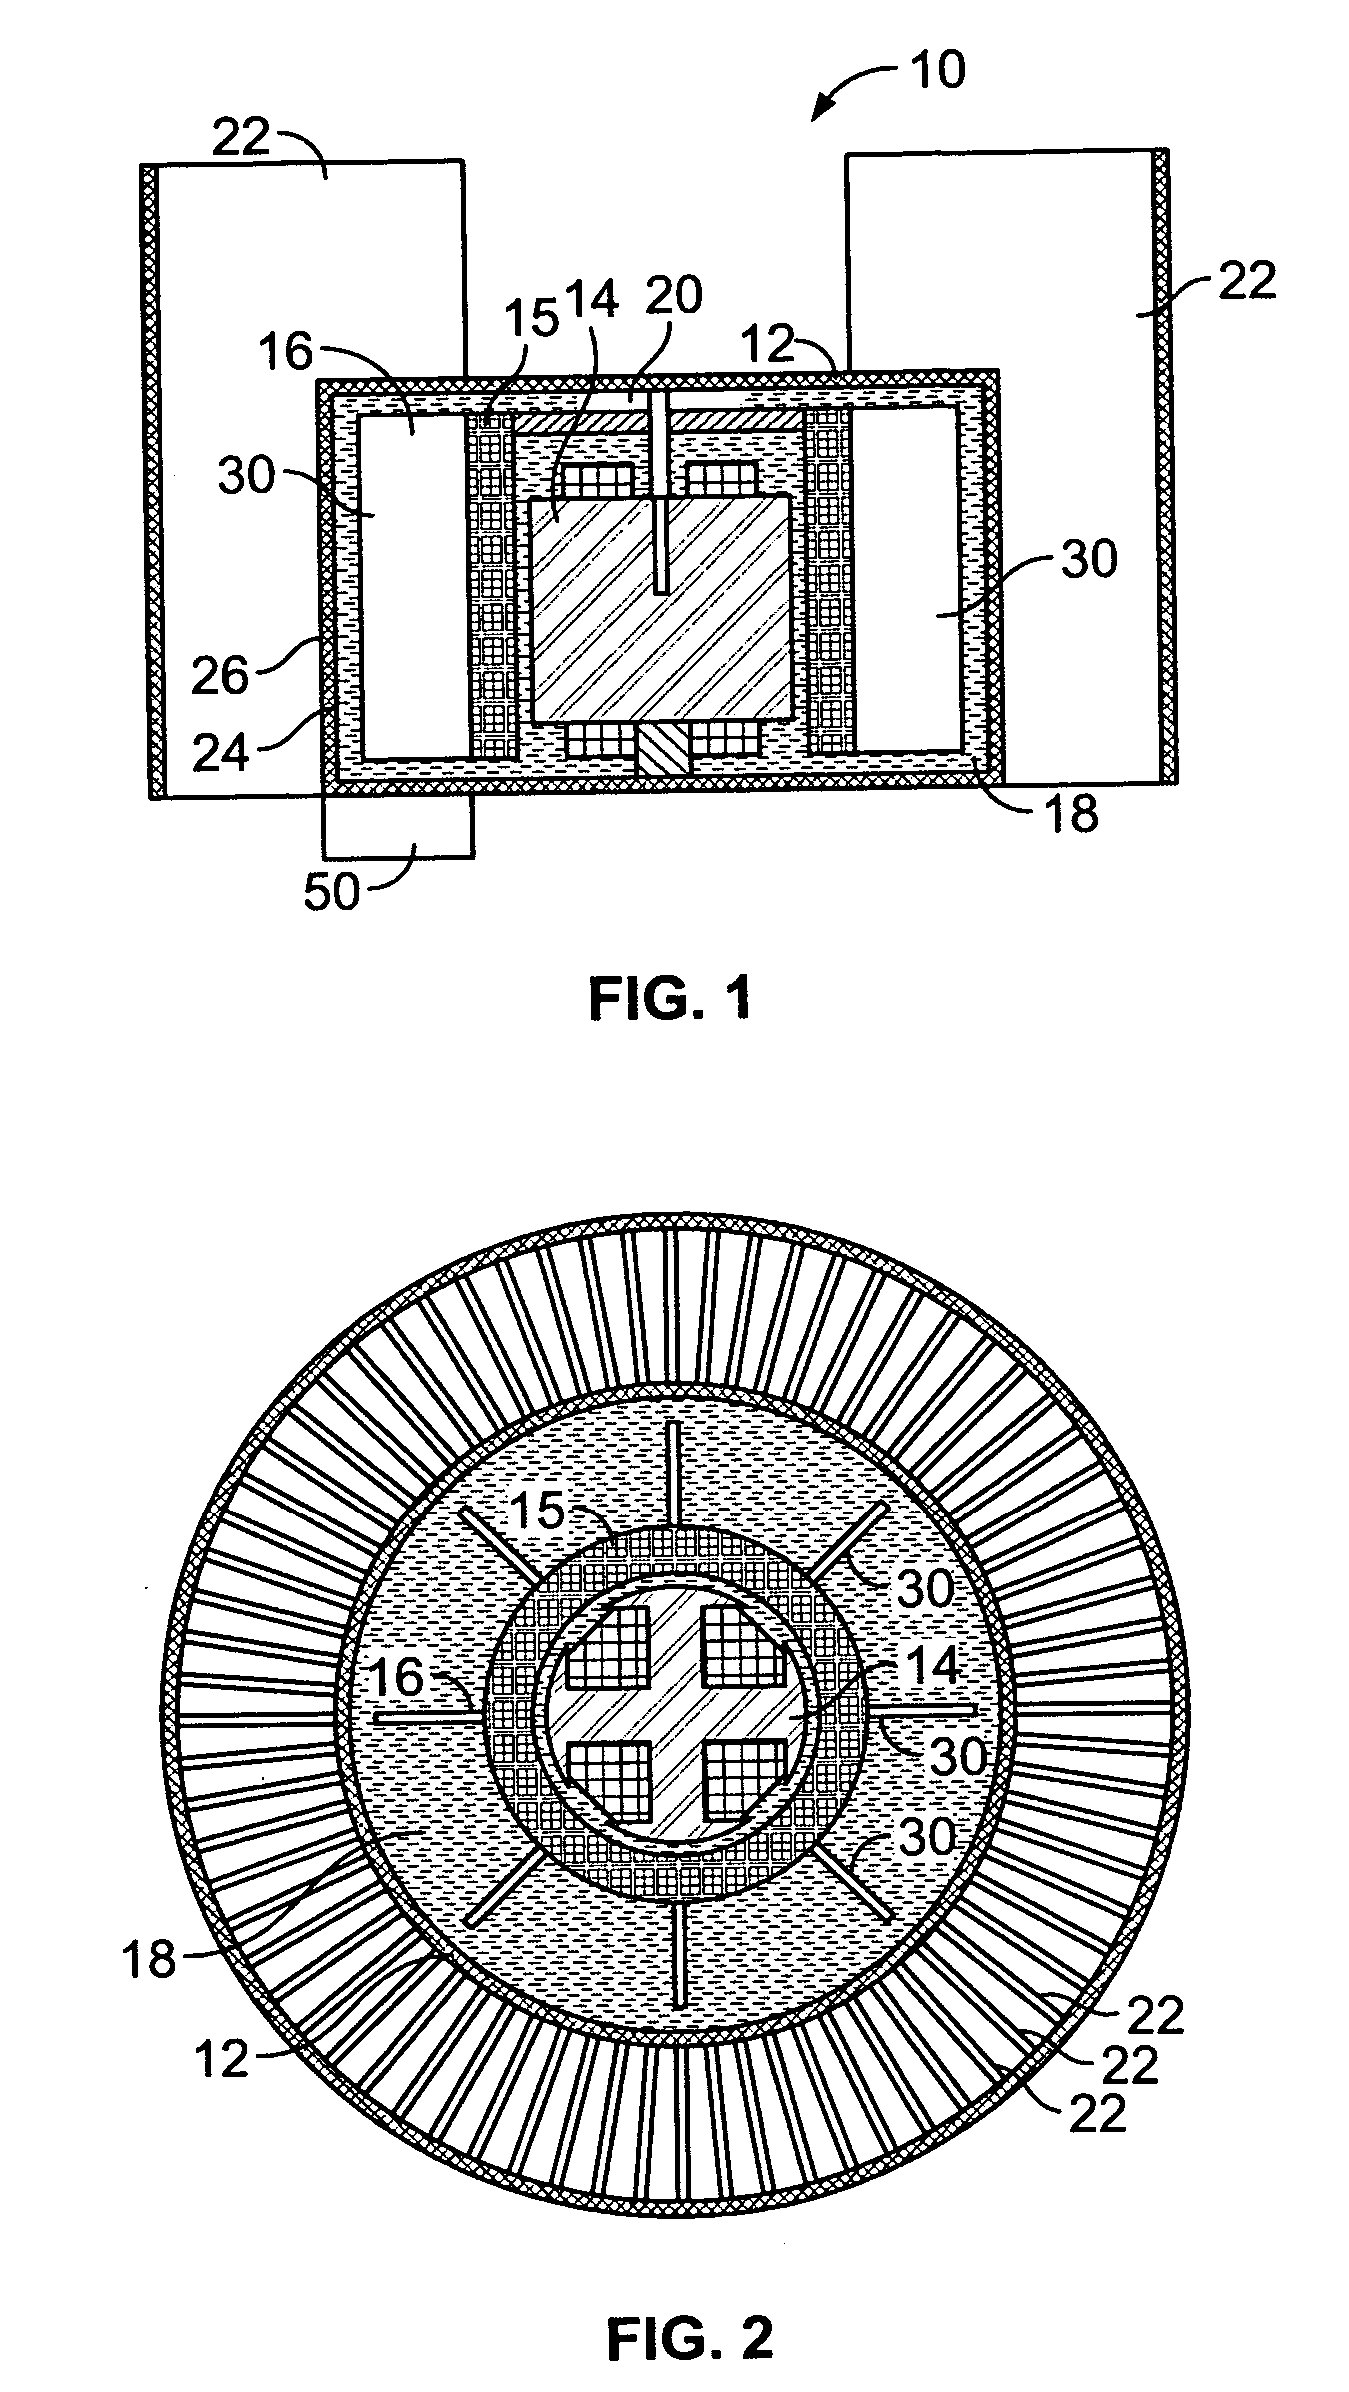 Integrated liquid cooling device with immersed electronic components